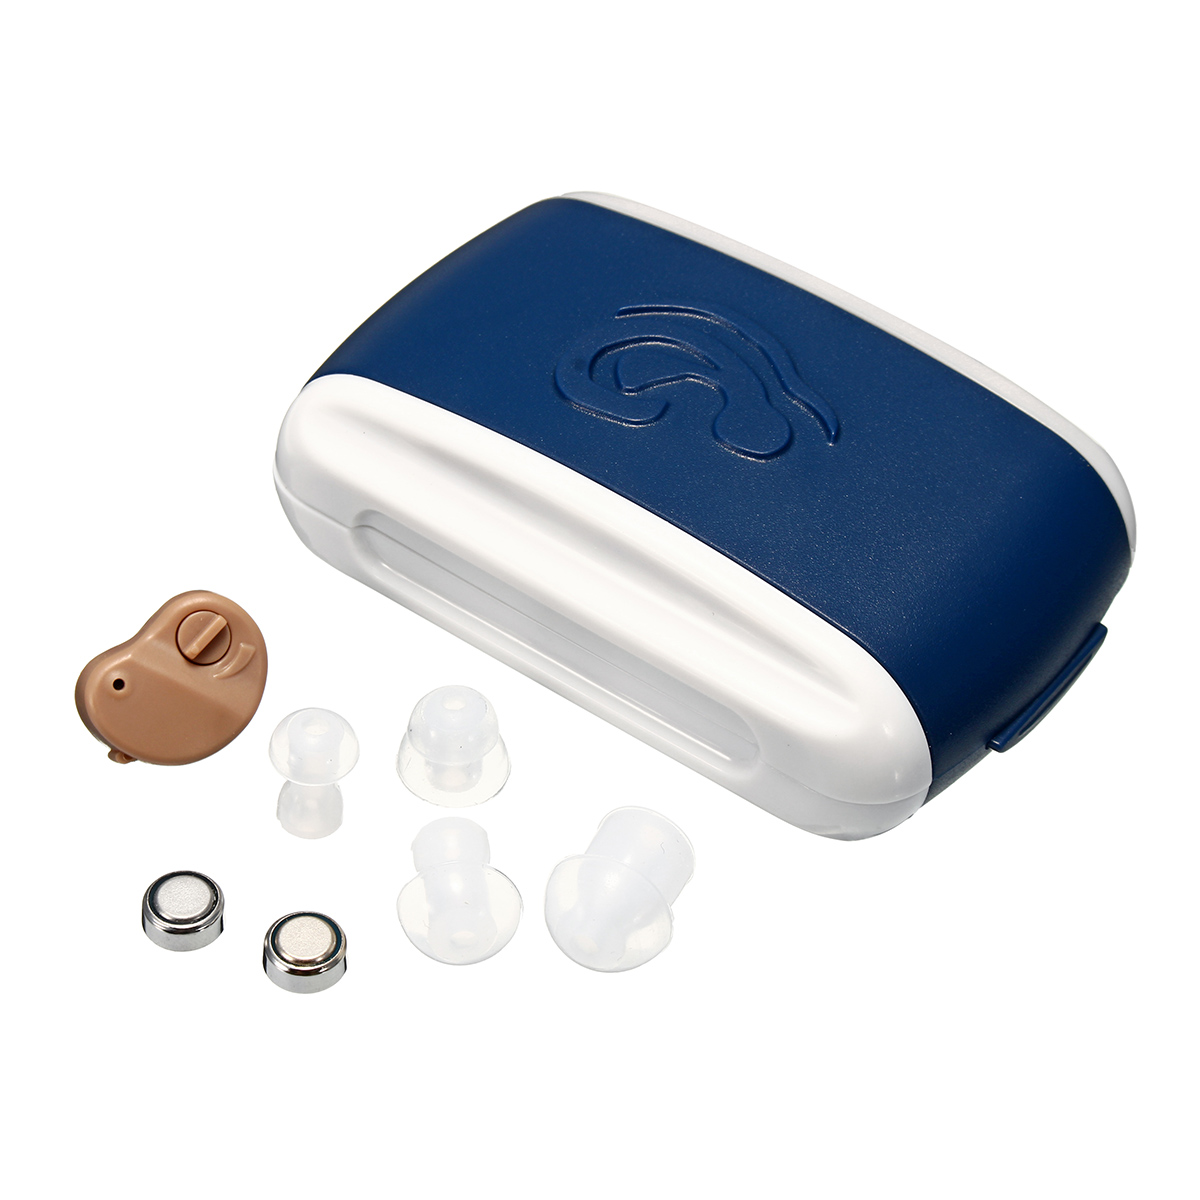 Adjustable Digital Hearing Aids Mini In-Ear Best Sound Voice Amplifier Invisible 12